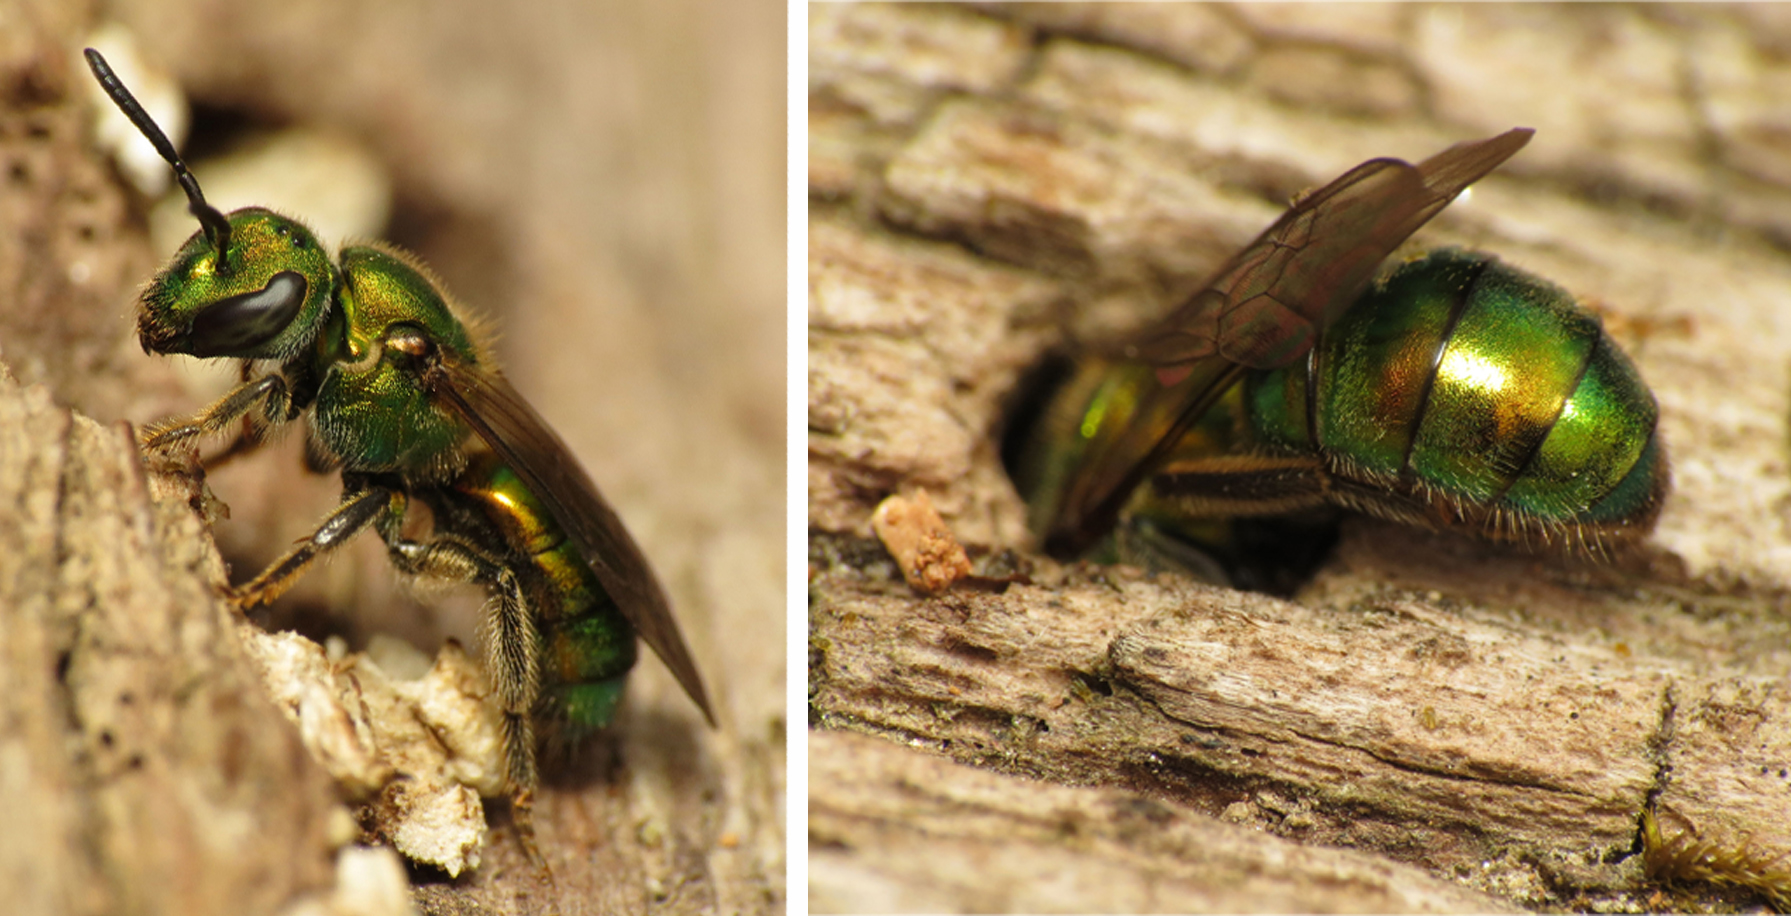 In this two-part graphic, a metallic green bee first is posed near a hole in reddish-tan wood, and then starts to climb headfirst into it.